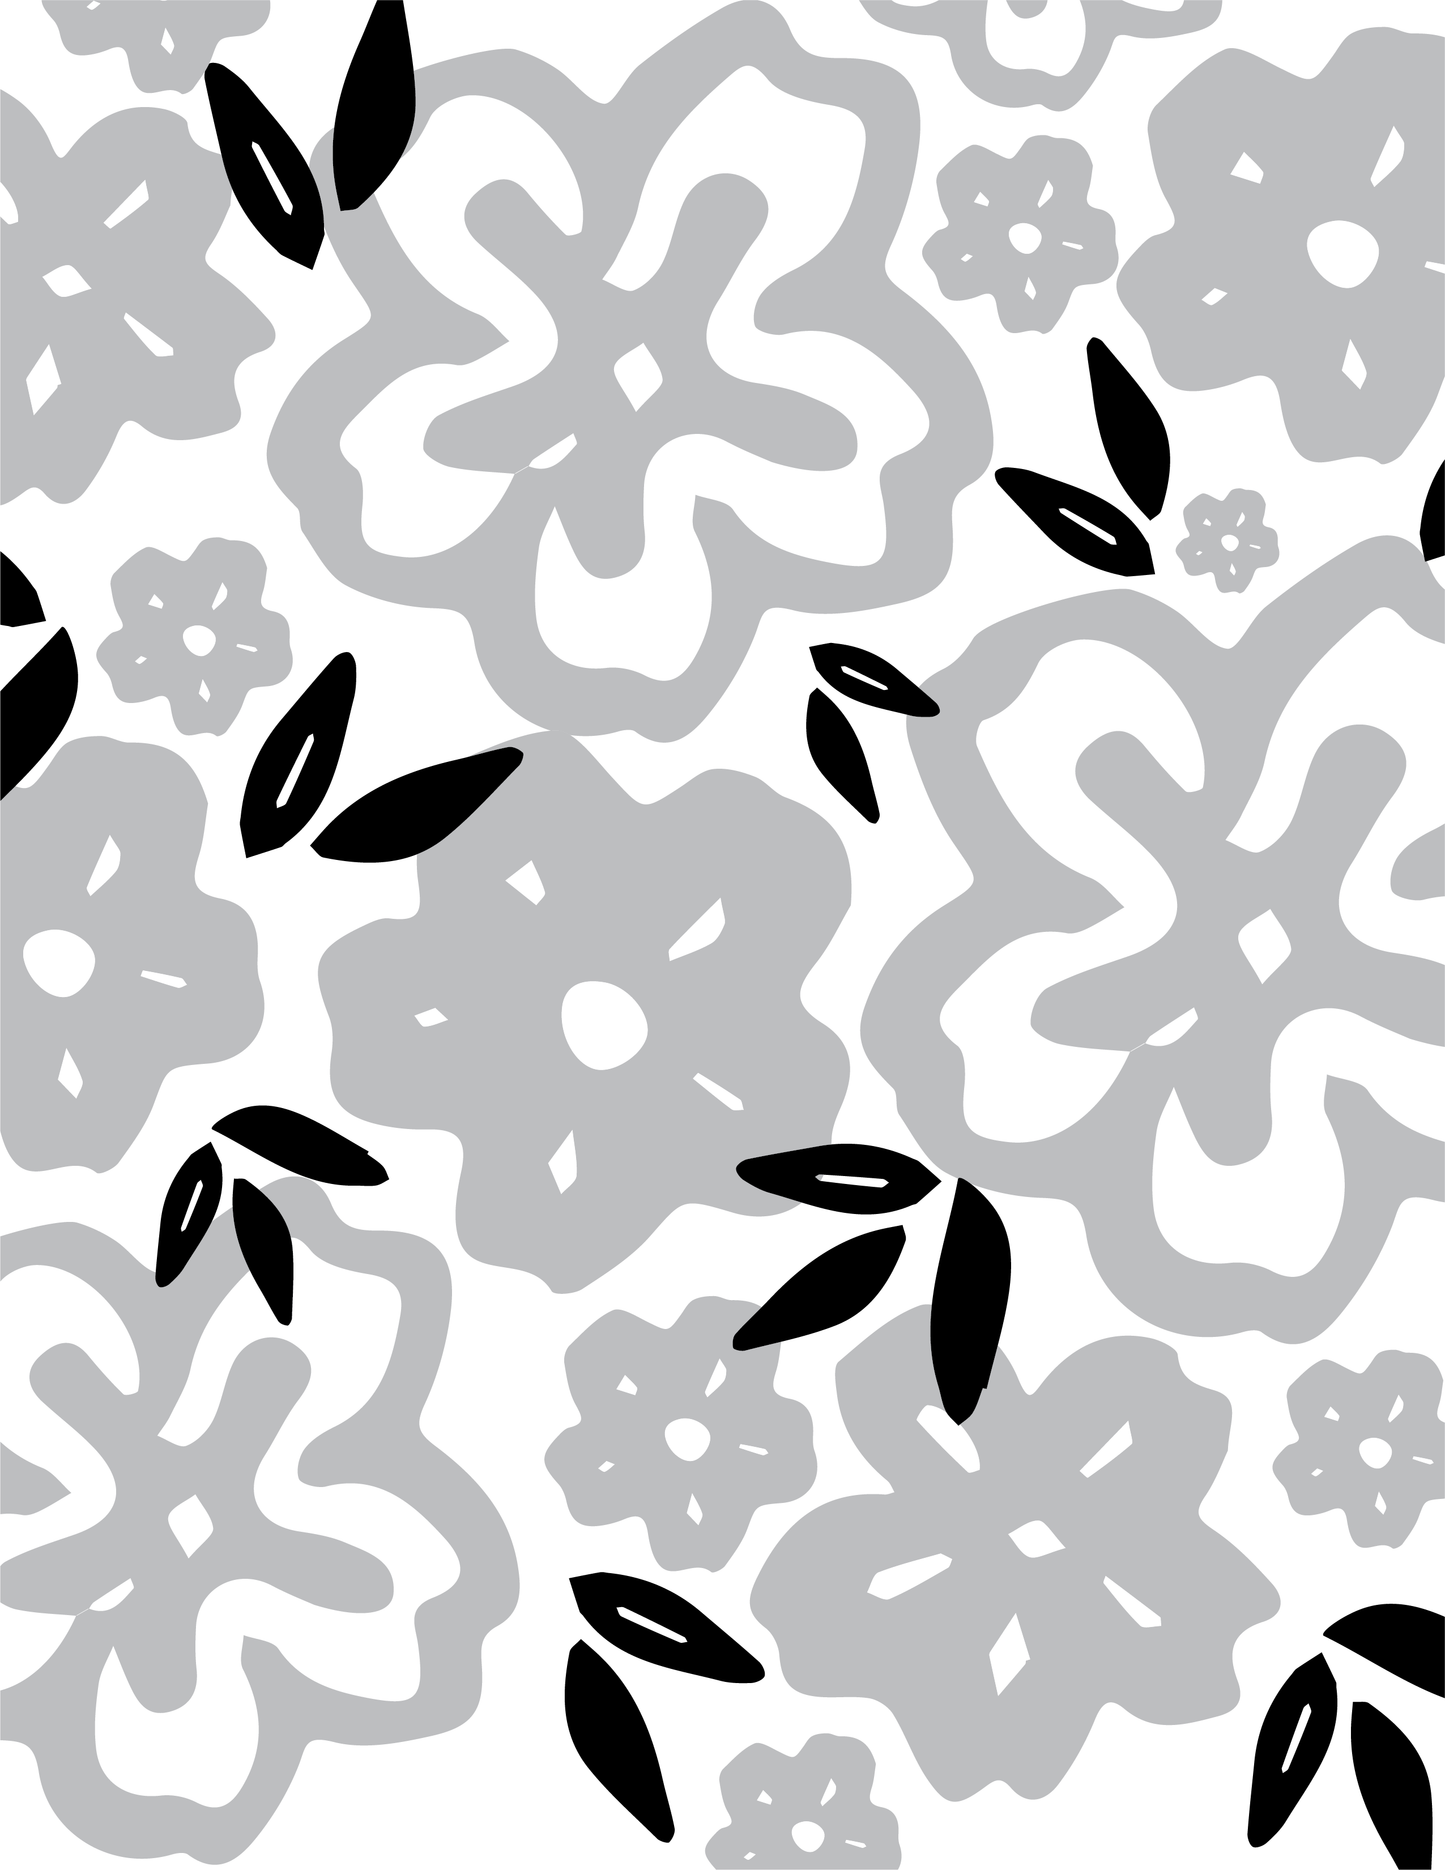 Patterned Papers - Digital Download